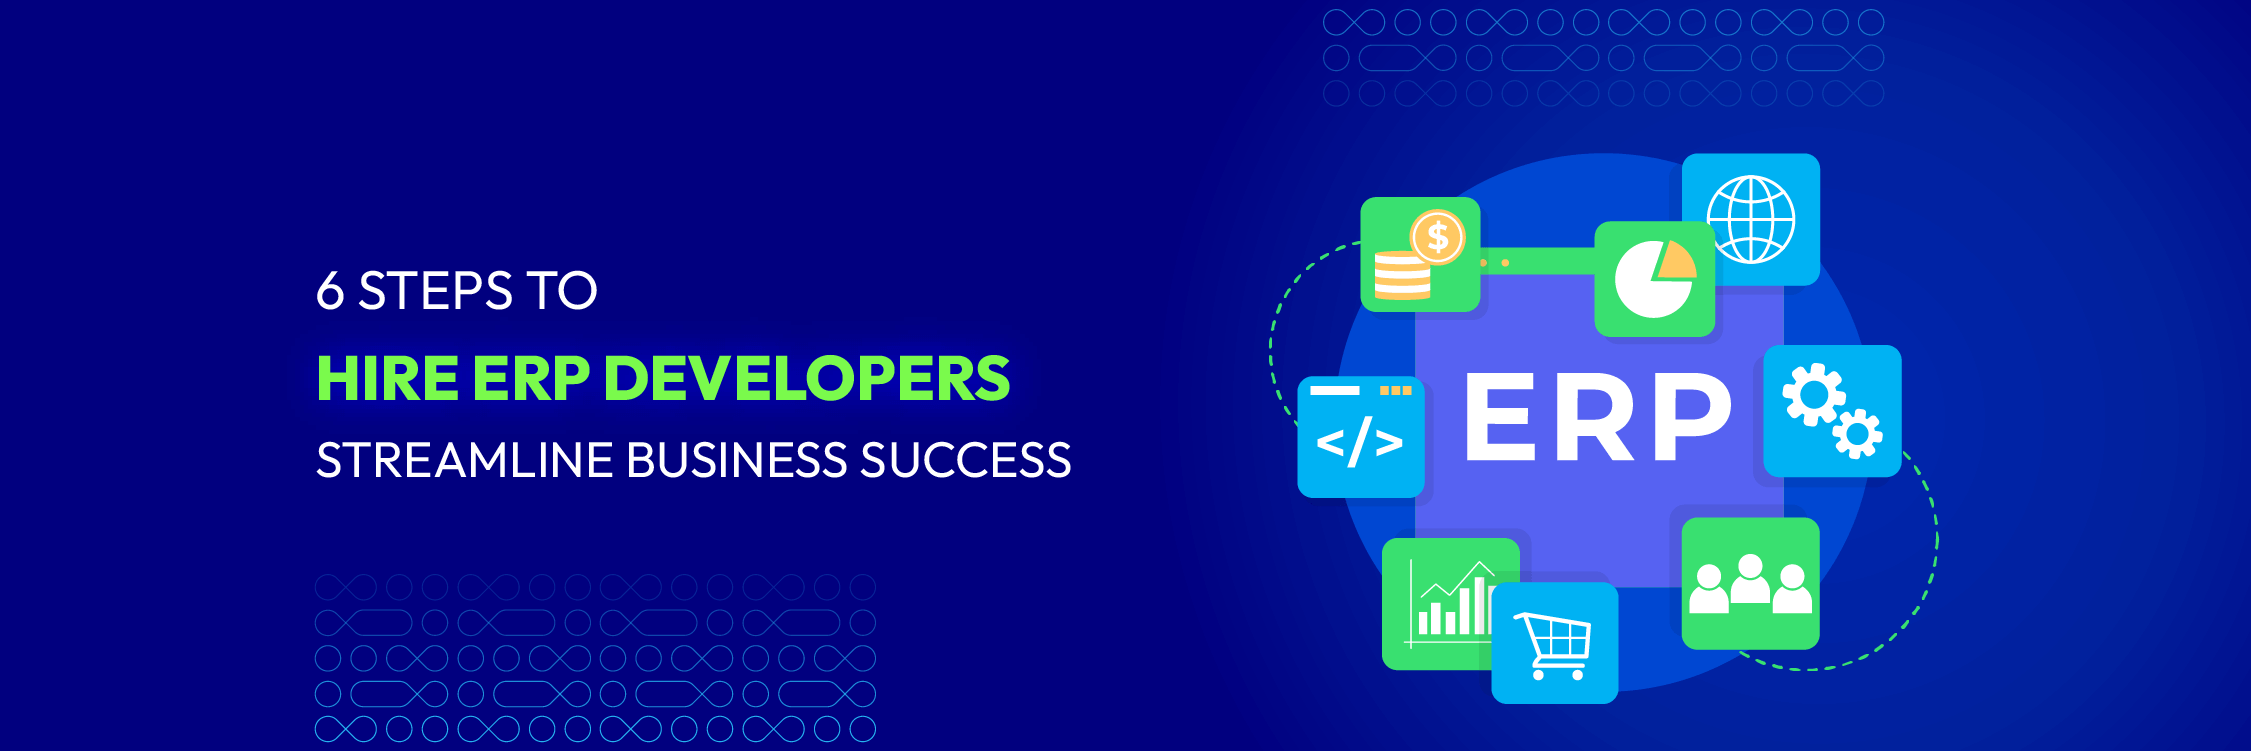 6 Steps to Hire ERP Developers: Streamline Business Success – Mageplaza